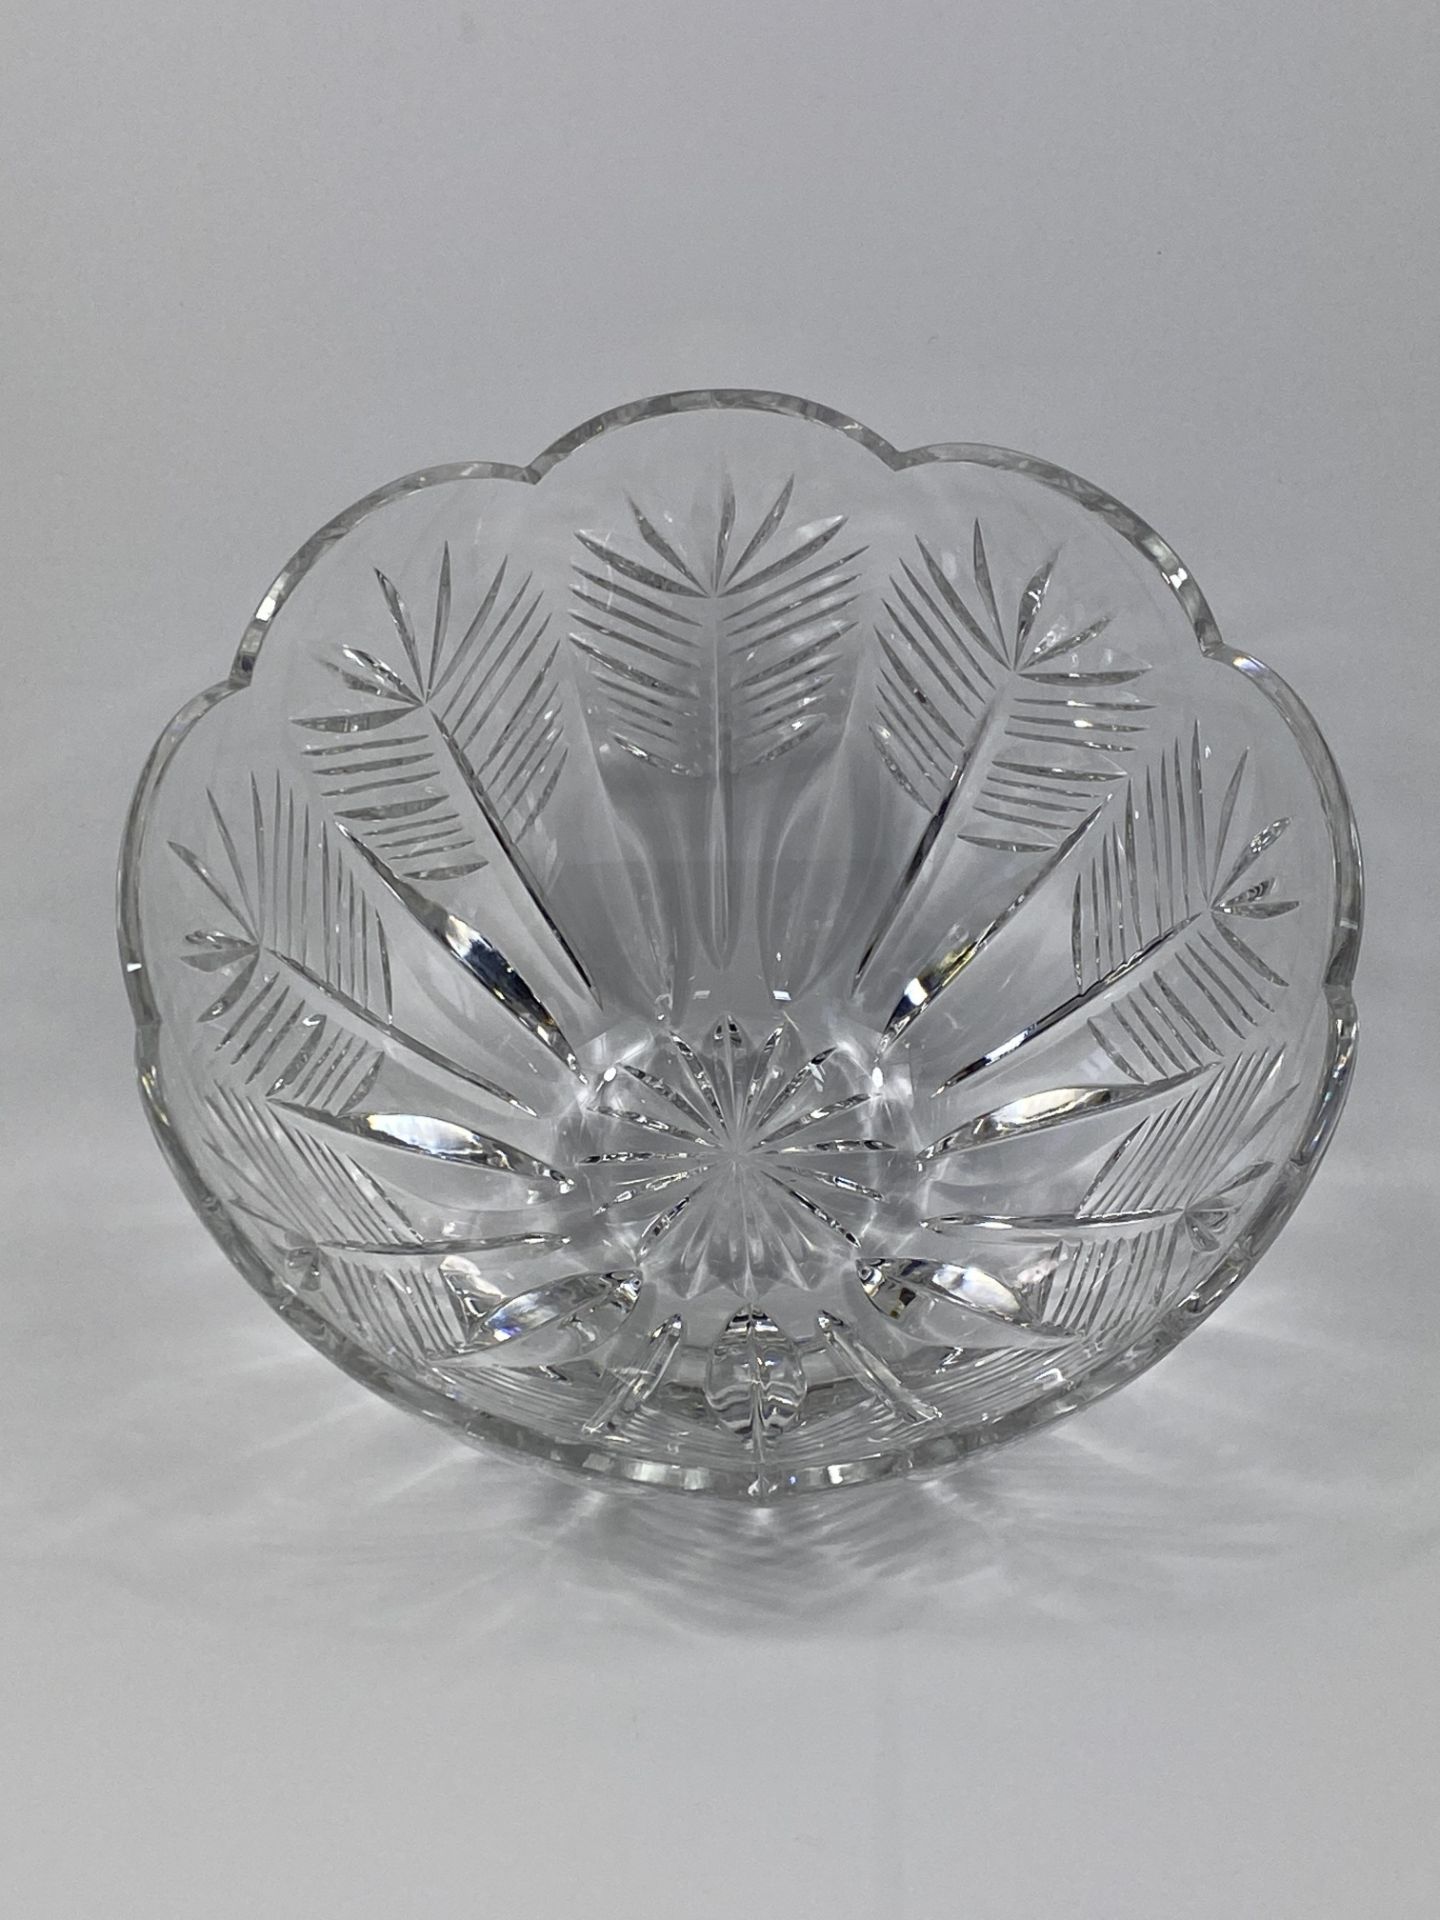 Waterford crystal glass bowl - Image 4 of 6